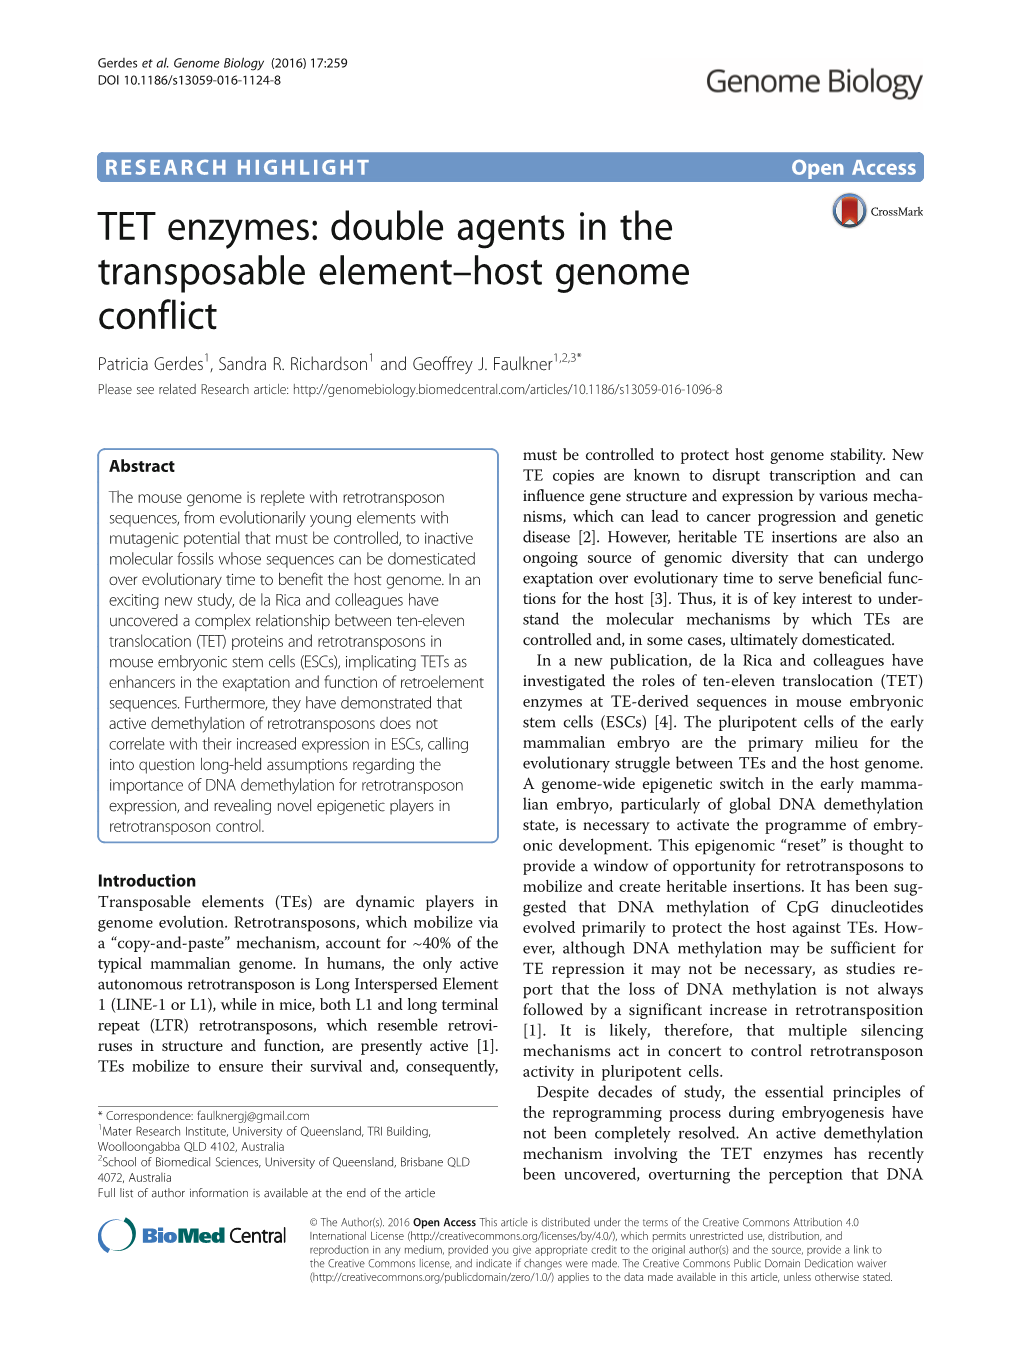 TET Enzymes: Double Agents in the Transposable Element–Host Genome Conflict Patricia Gerdes1, Sandra R